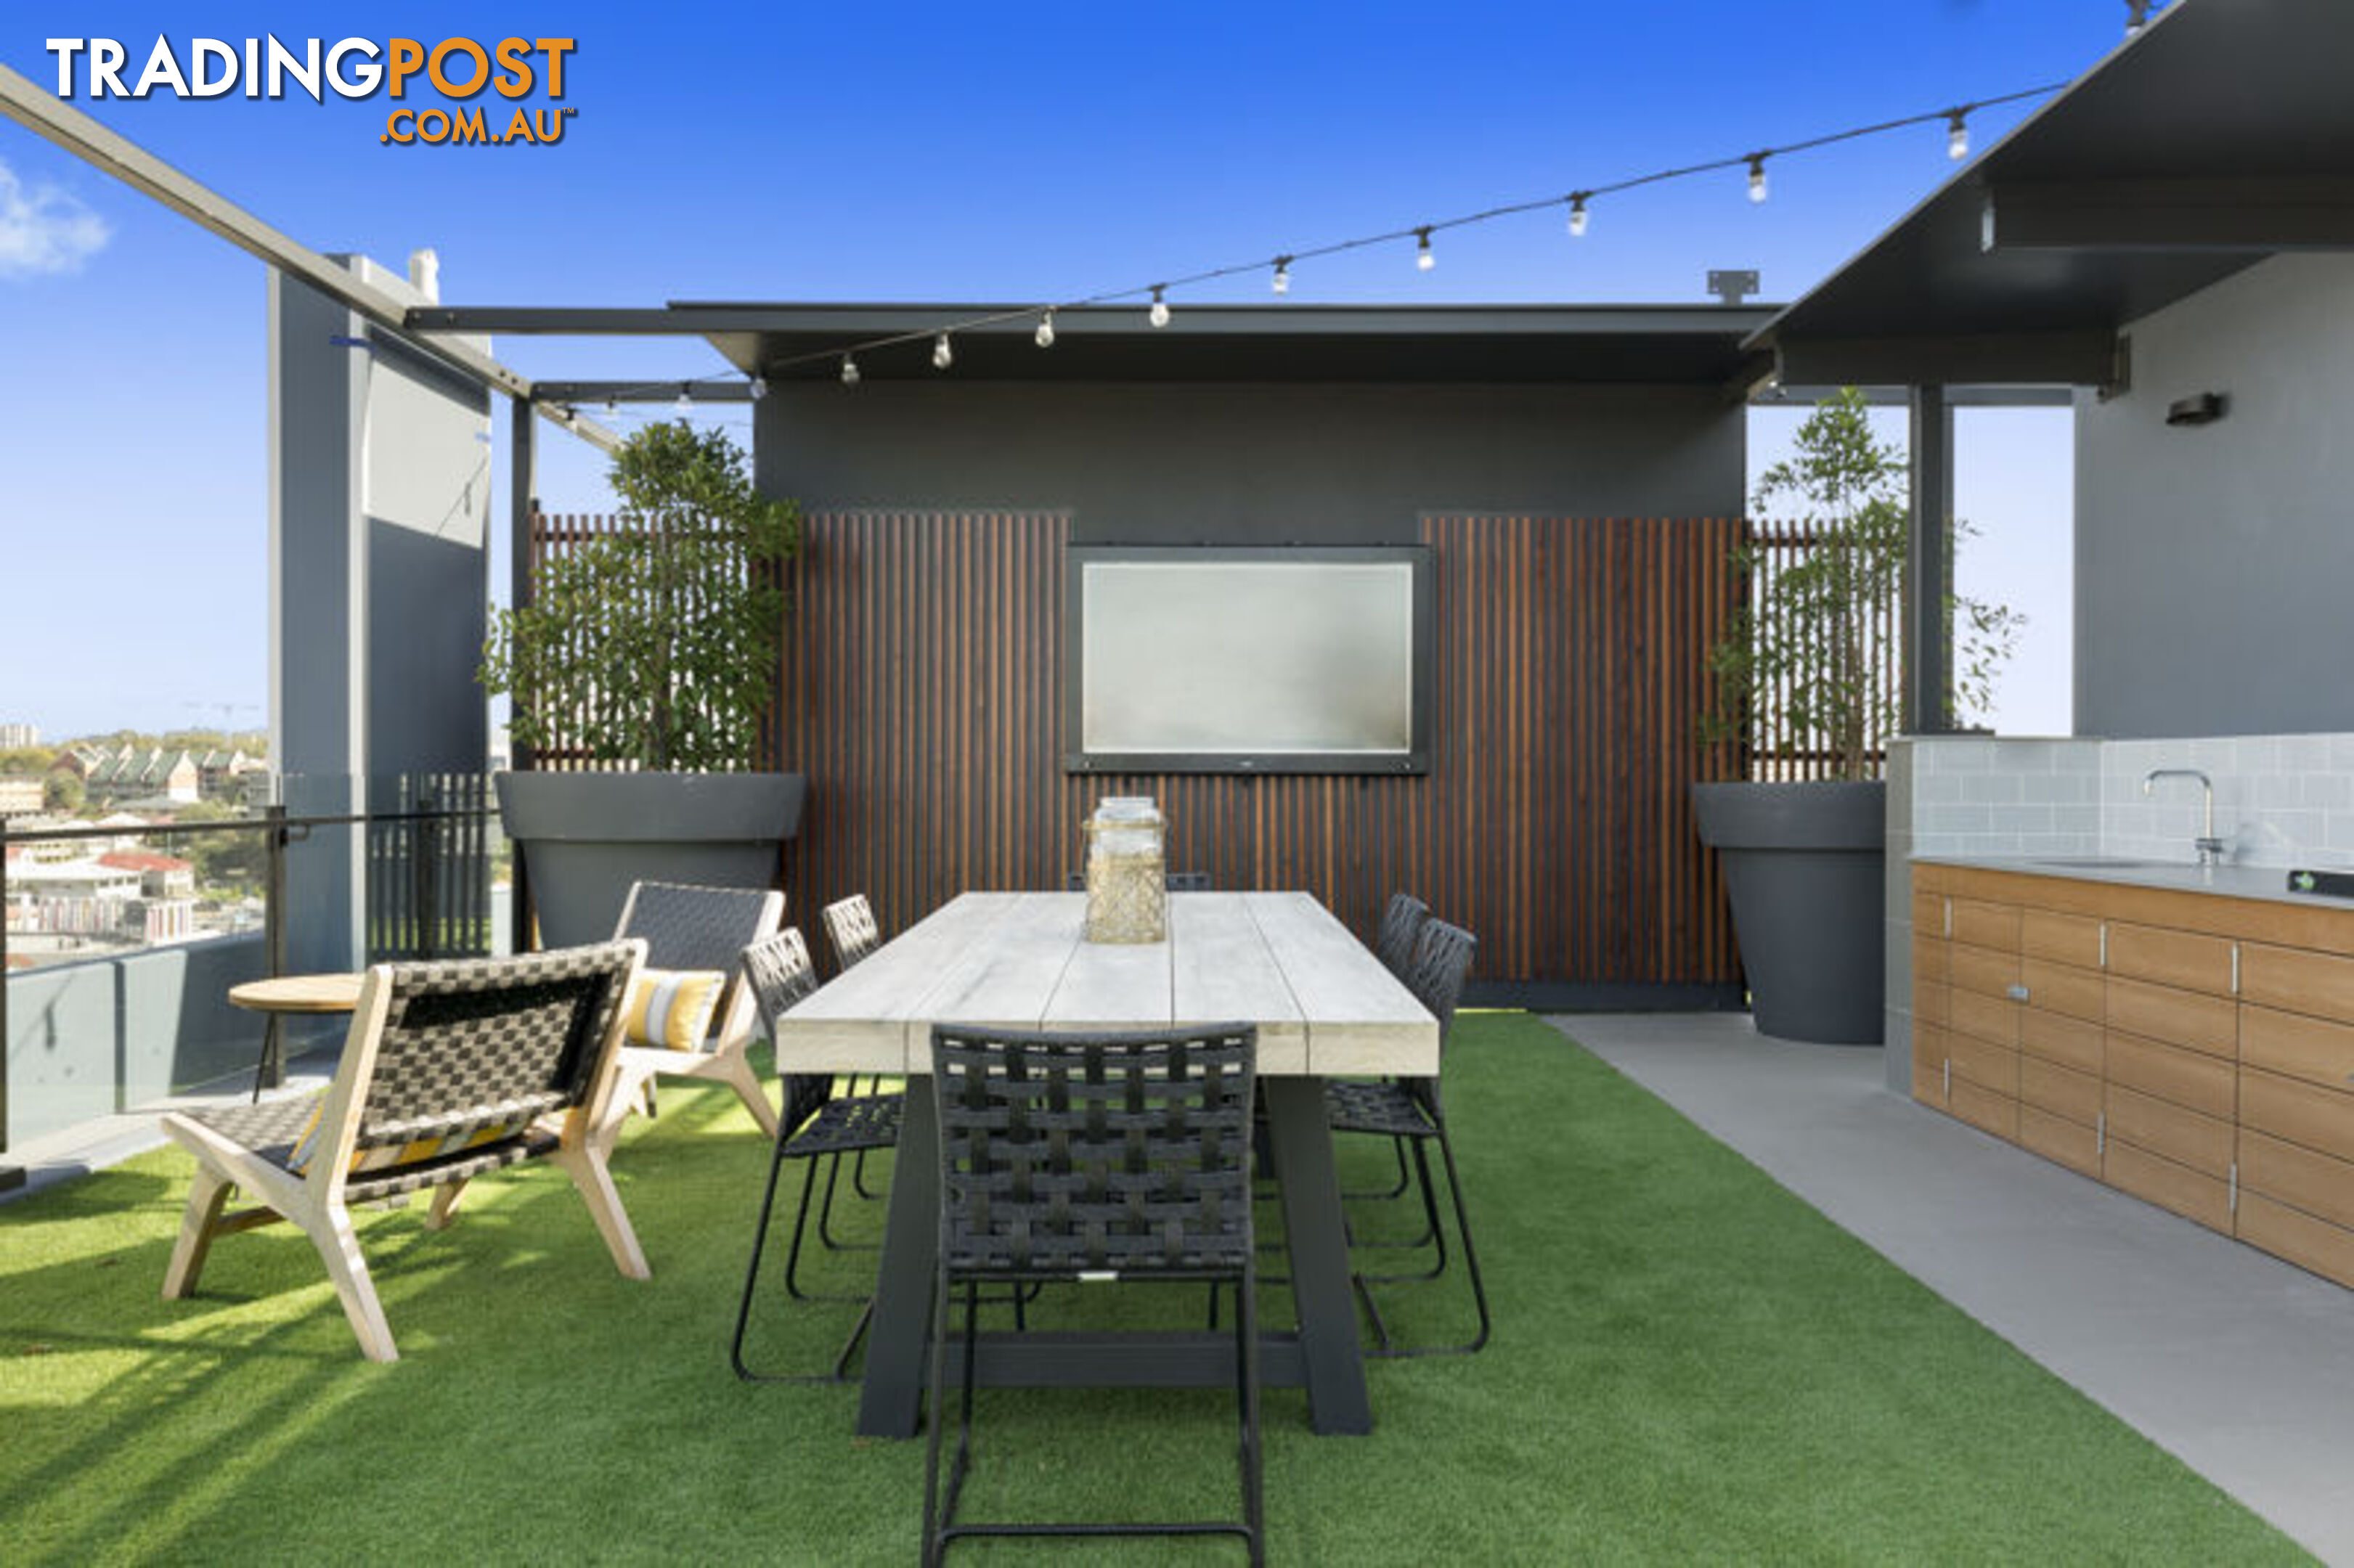 L8/398 St Pauls Tce FORTITUDE VALLEY QLD 4006